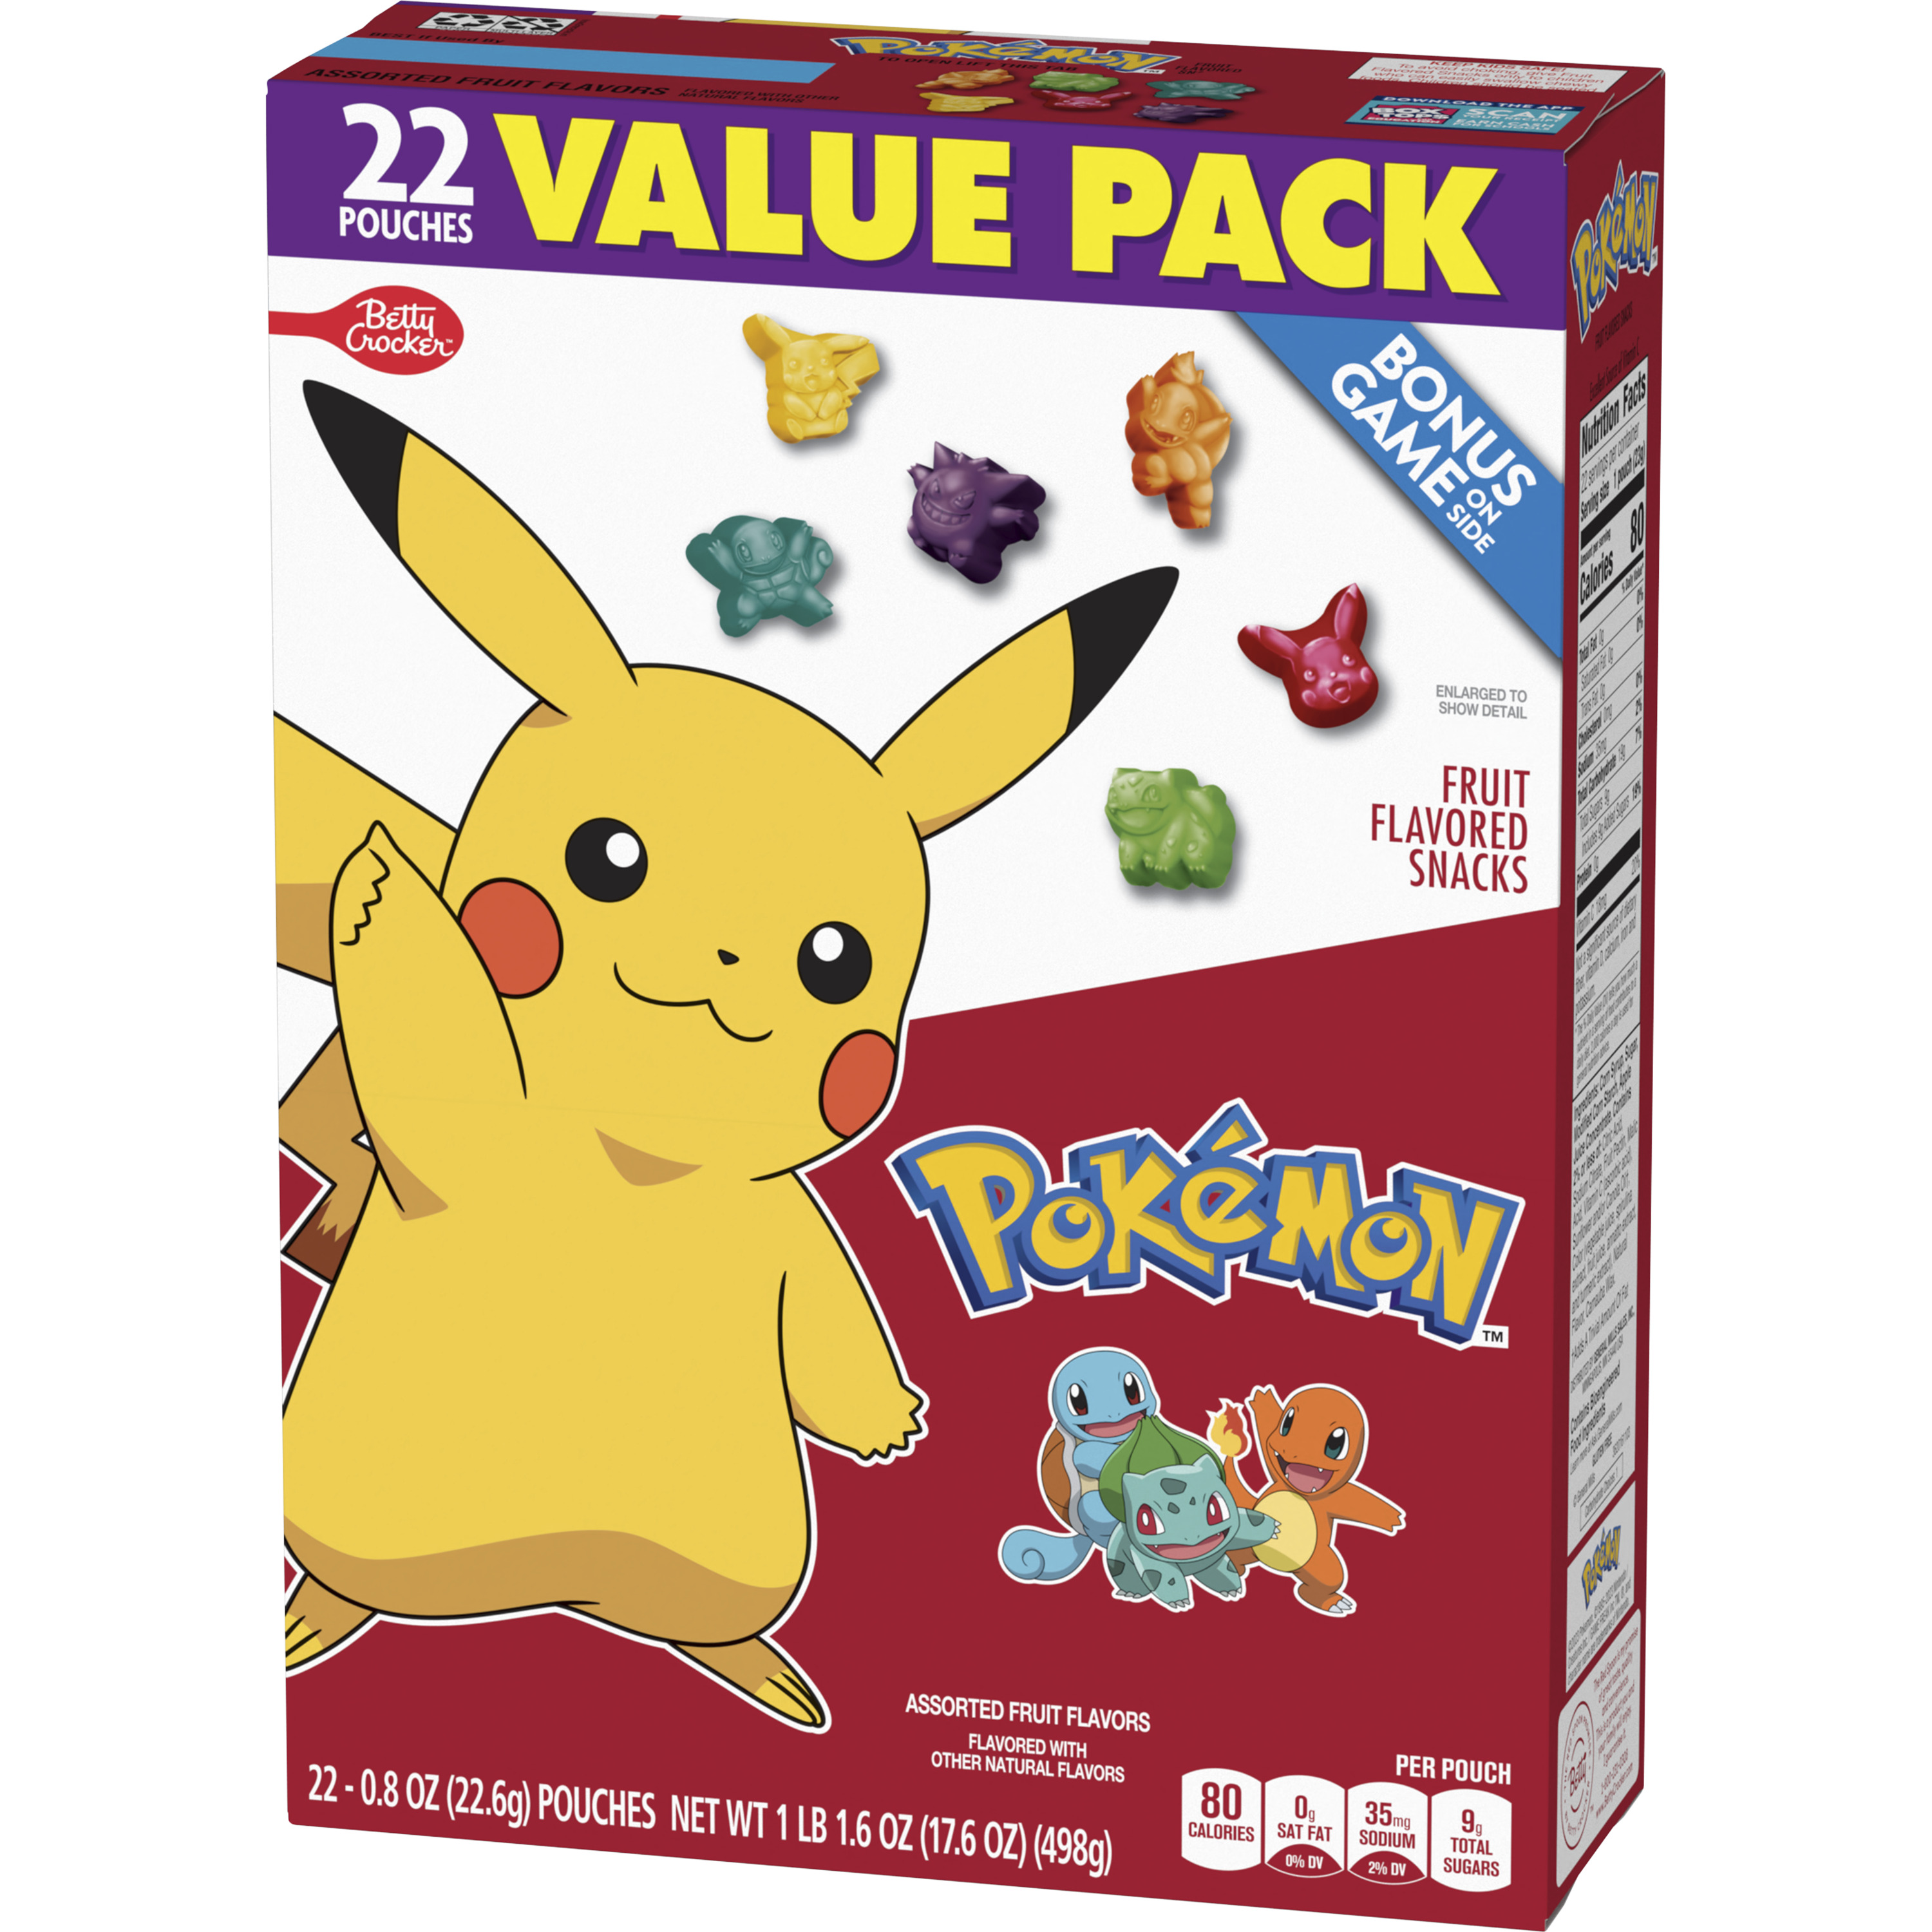 Pokemon Fruit Flavored Snacks, Treat Pouches, Value Pack, 22 ct - image 3 of 9